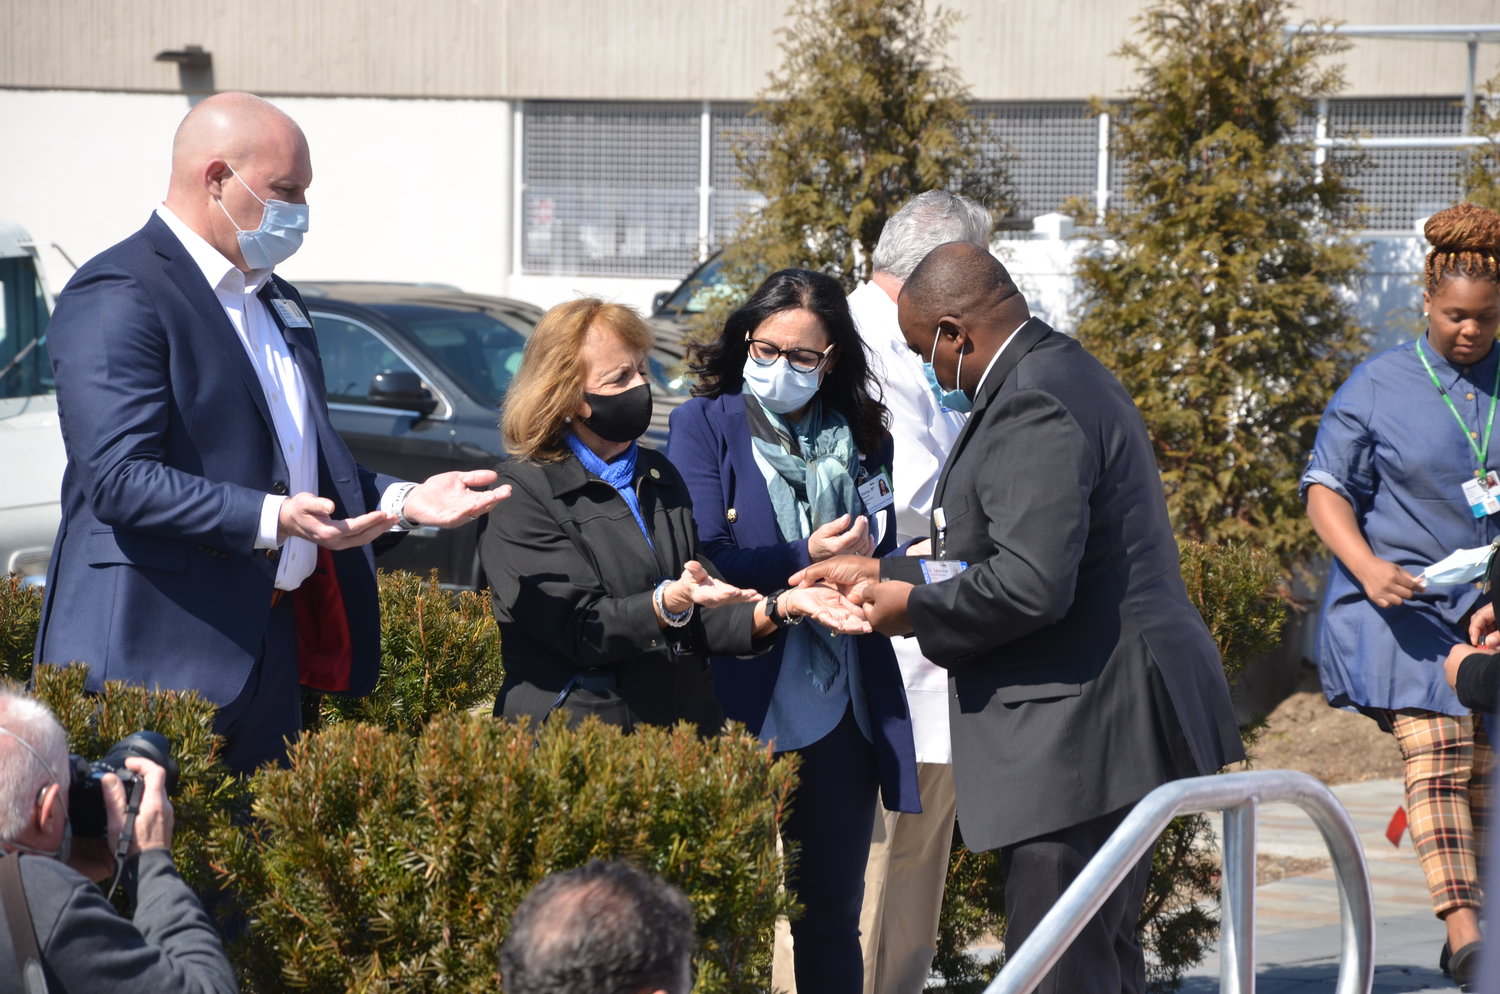 Islip Town supervisor Angie Carpenter receives a blessing of the hands from the Reverend Father Sylvester Chukwumalume at the remembrance ceremony on Thursday, March 11.